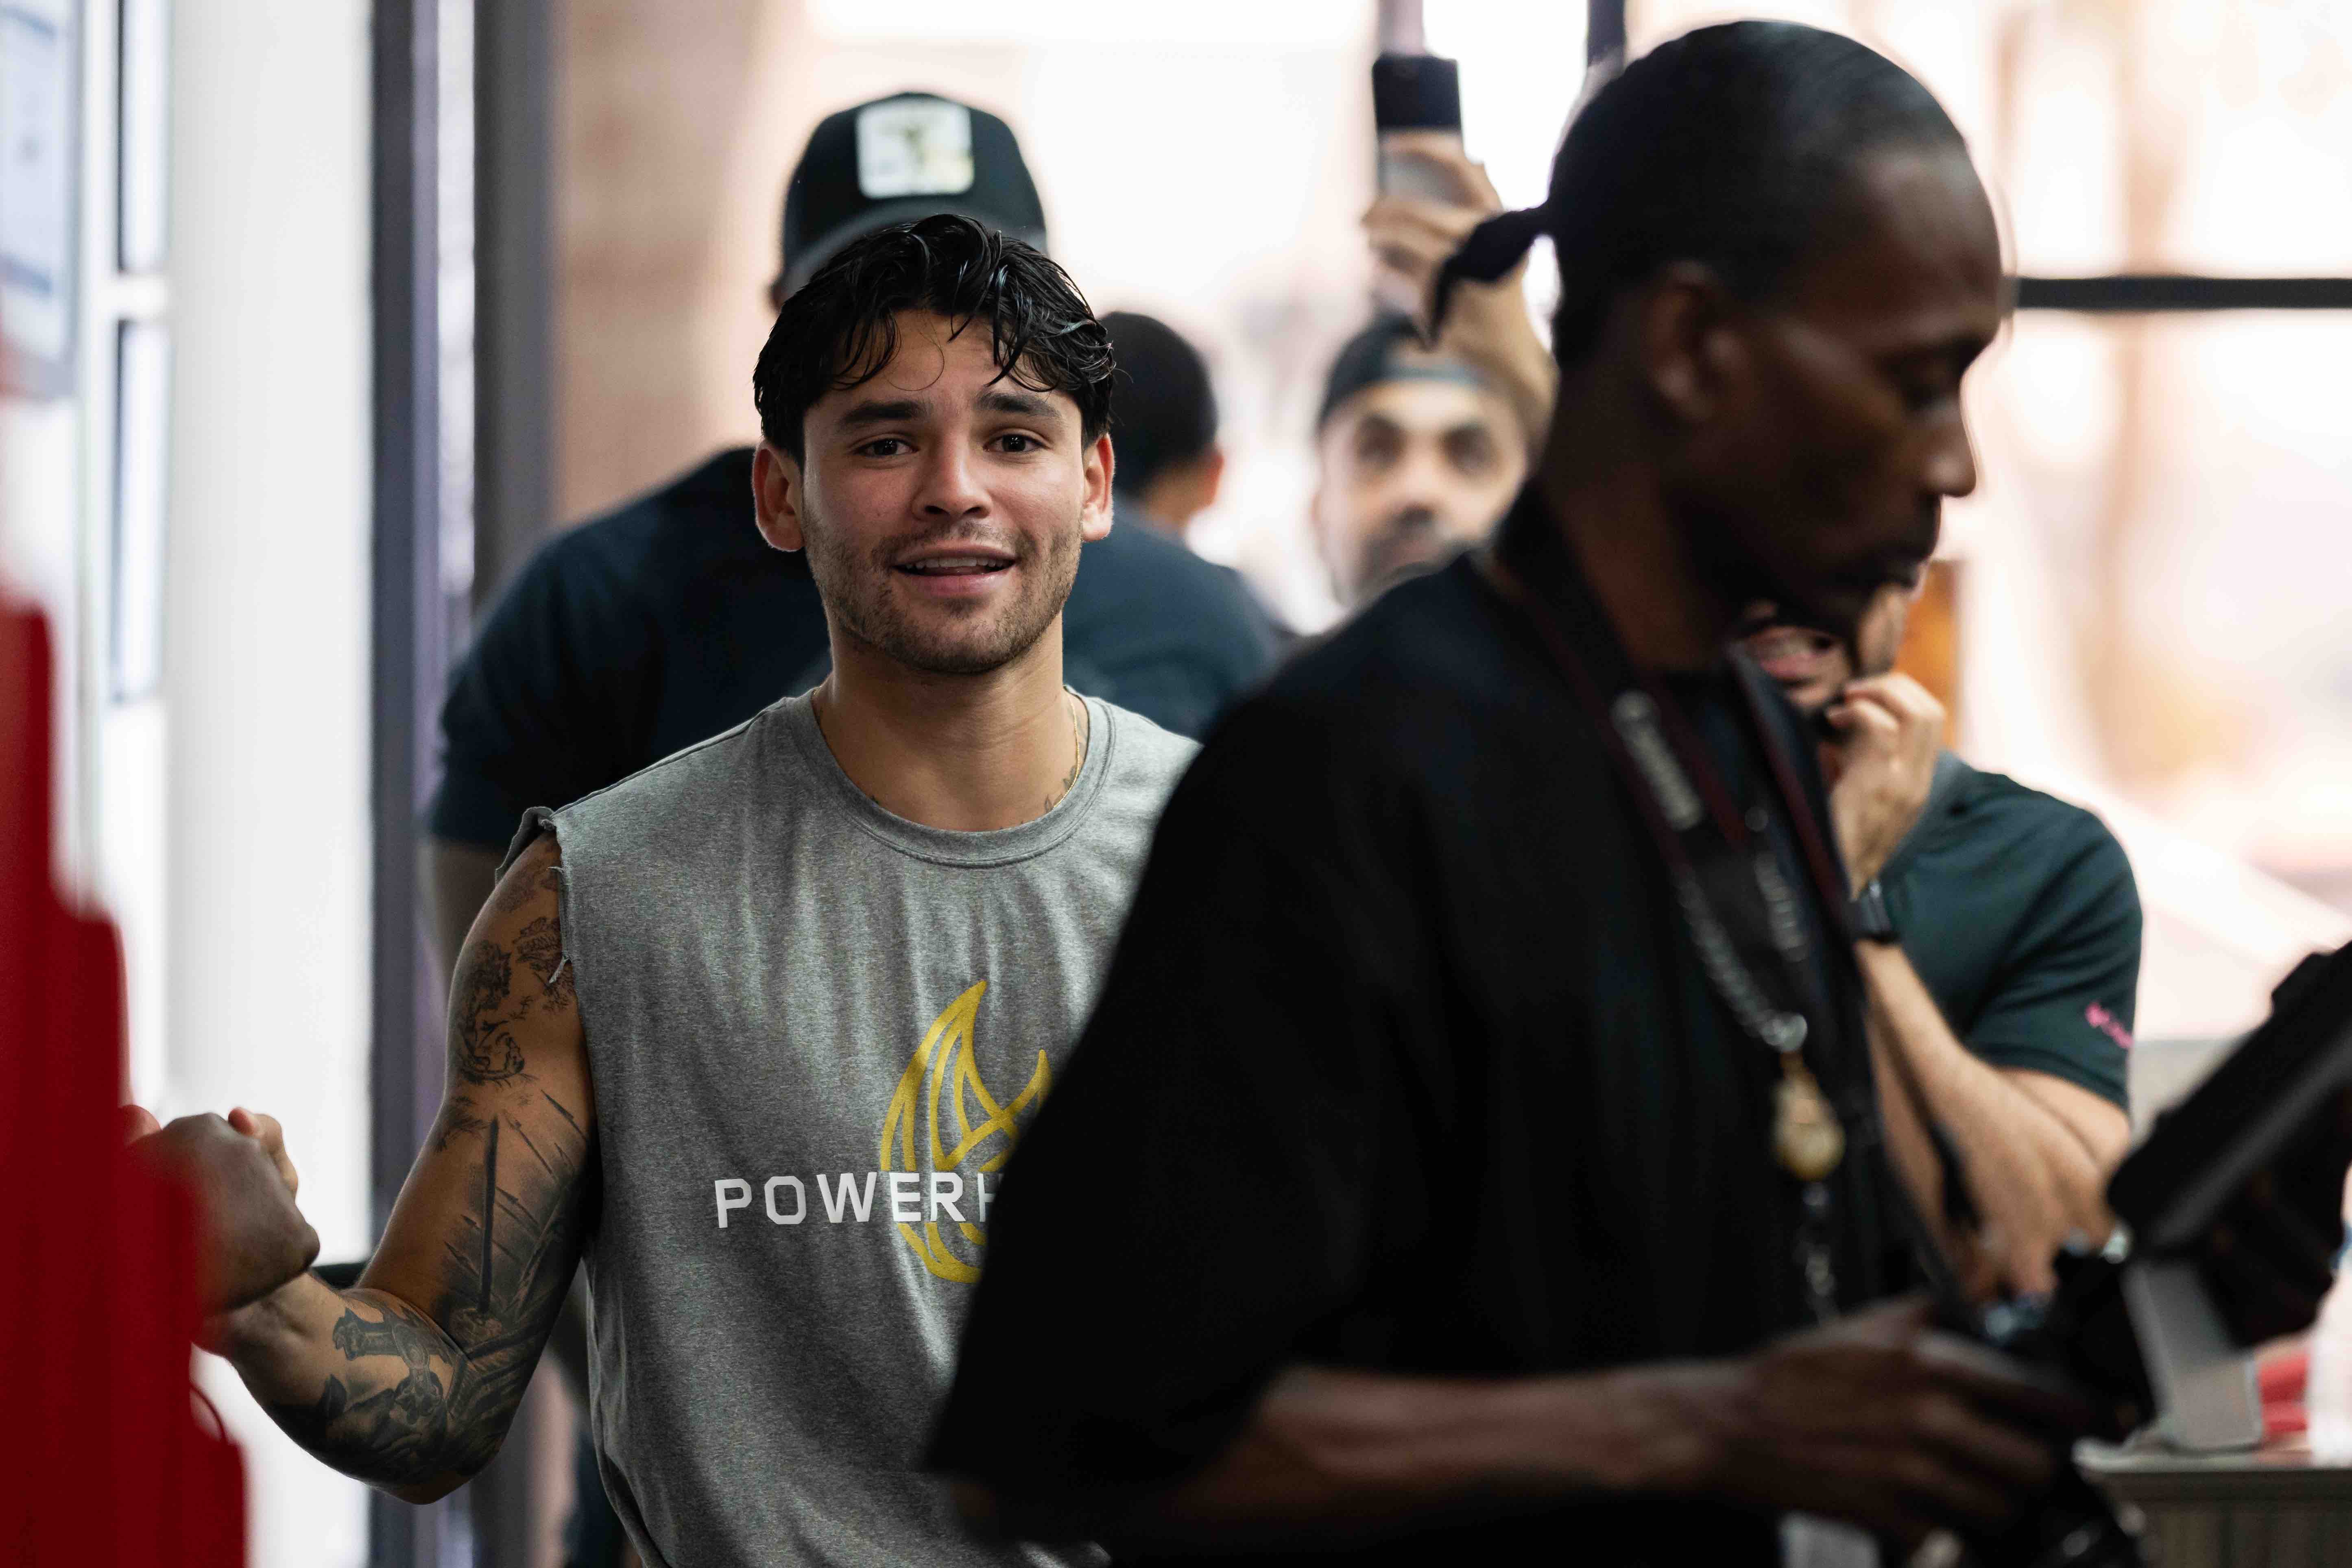 2 of boxing's biggest stars Terence Crawford and Ryan Garcia urge fighters to unite when Showtime leaves the sport